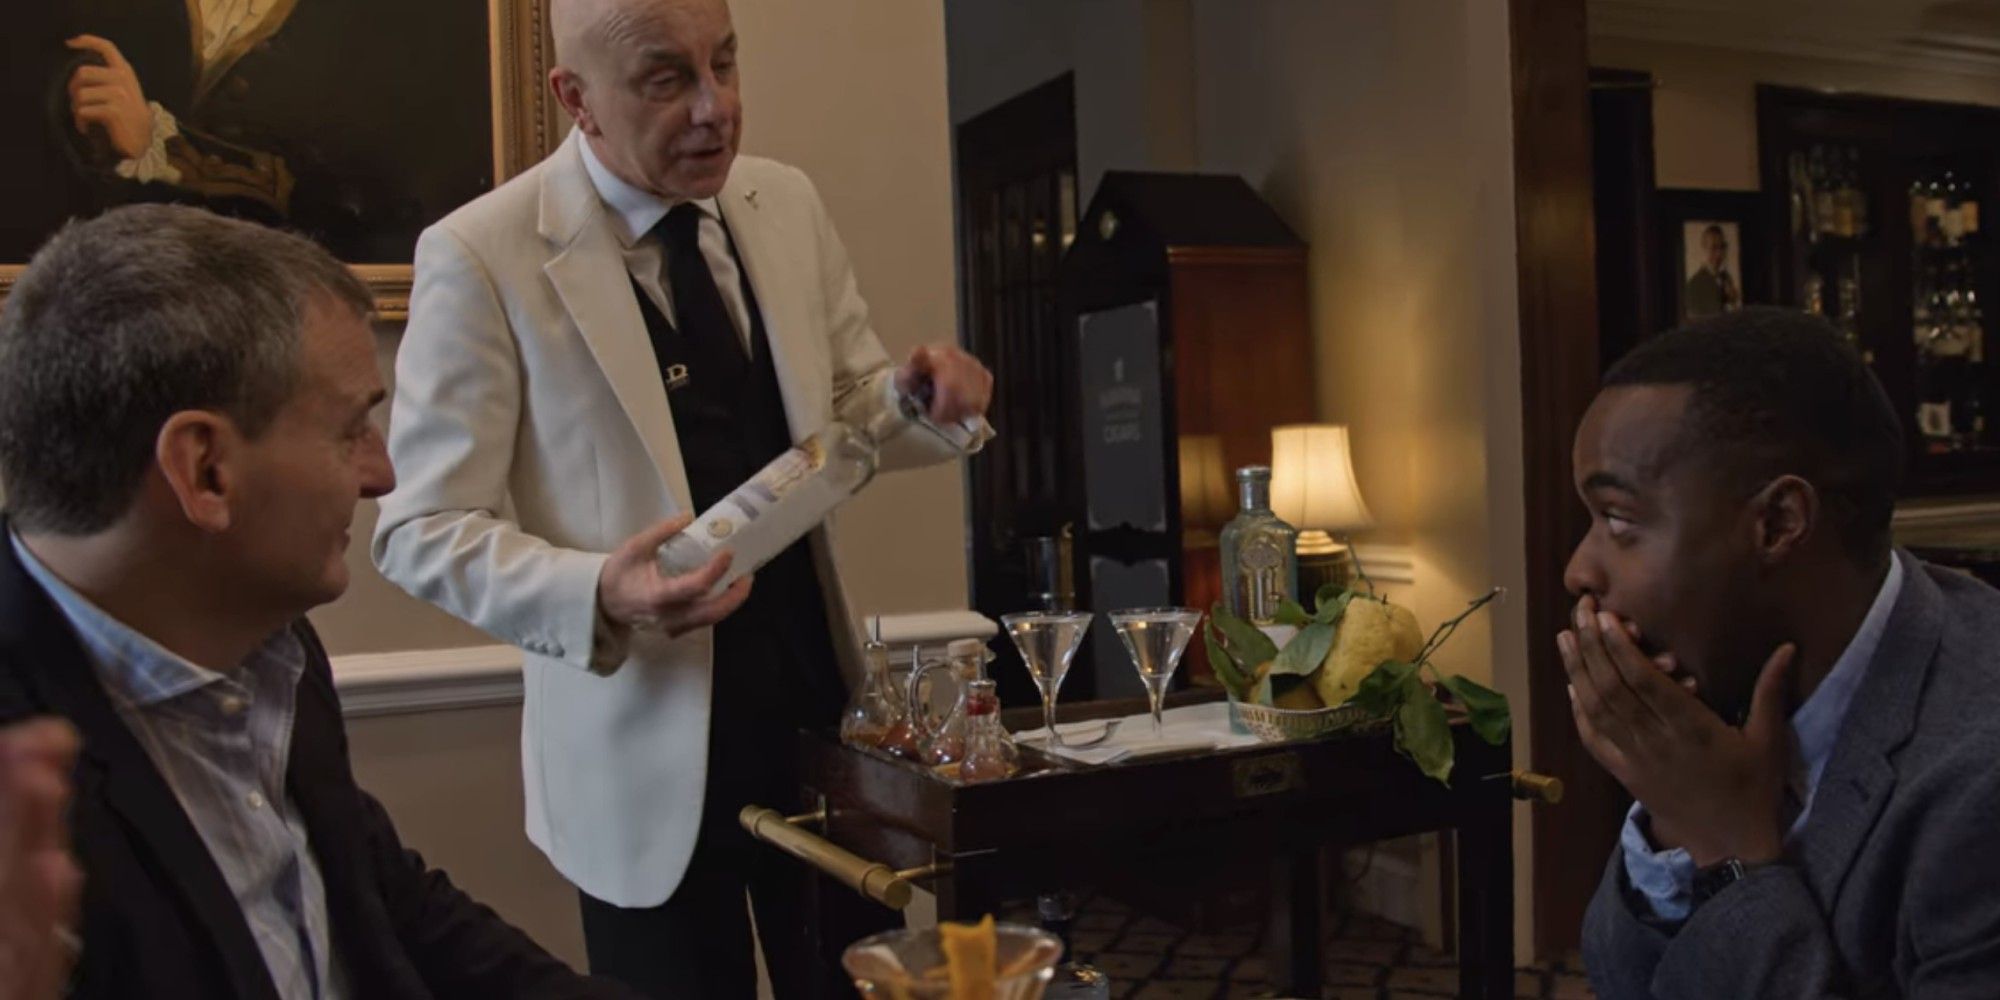 Table being presented with wine at Dukes London in Somebody Feed Phil season 3 episode 3